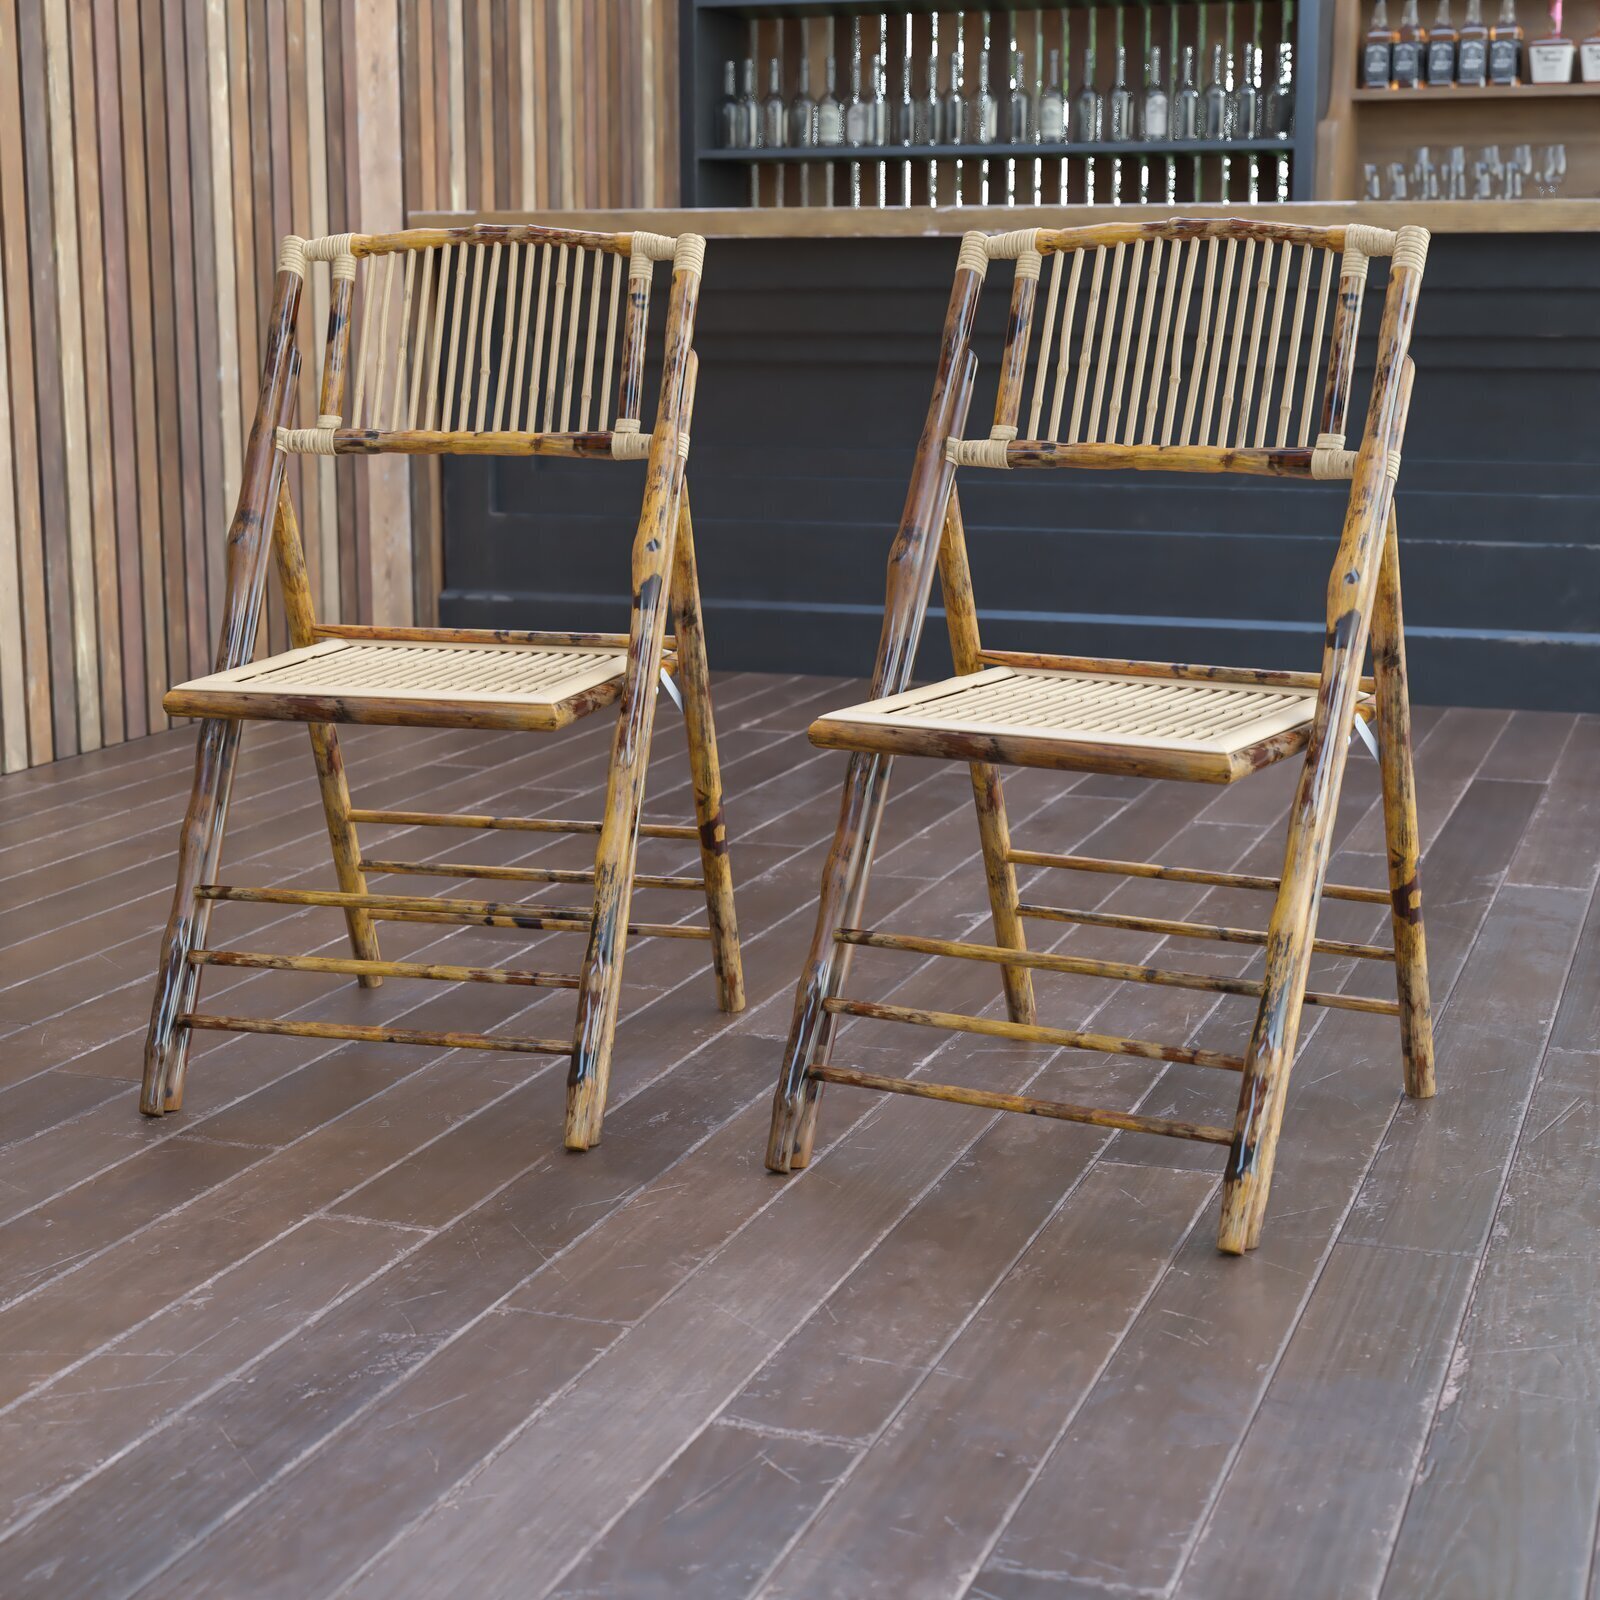 Folding indoor/outdoor chairs in bamboo